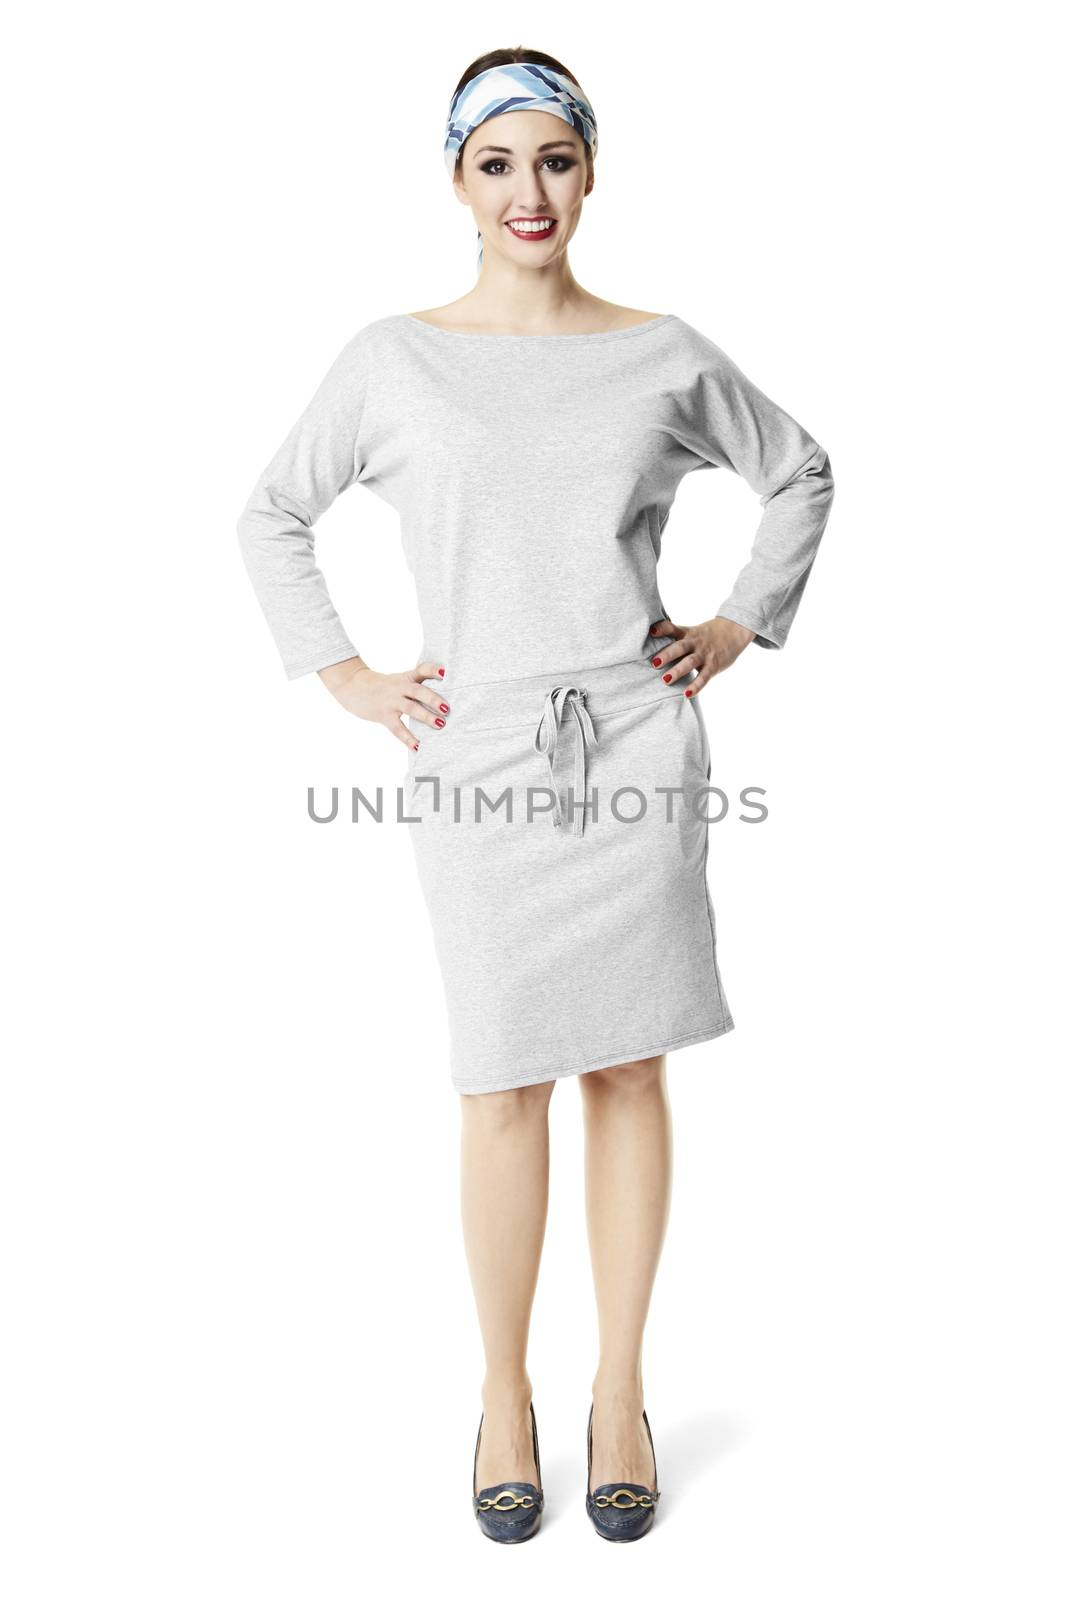 Full length portrait of attractive smiling housewife. Isolated on white background.